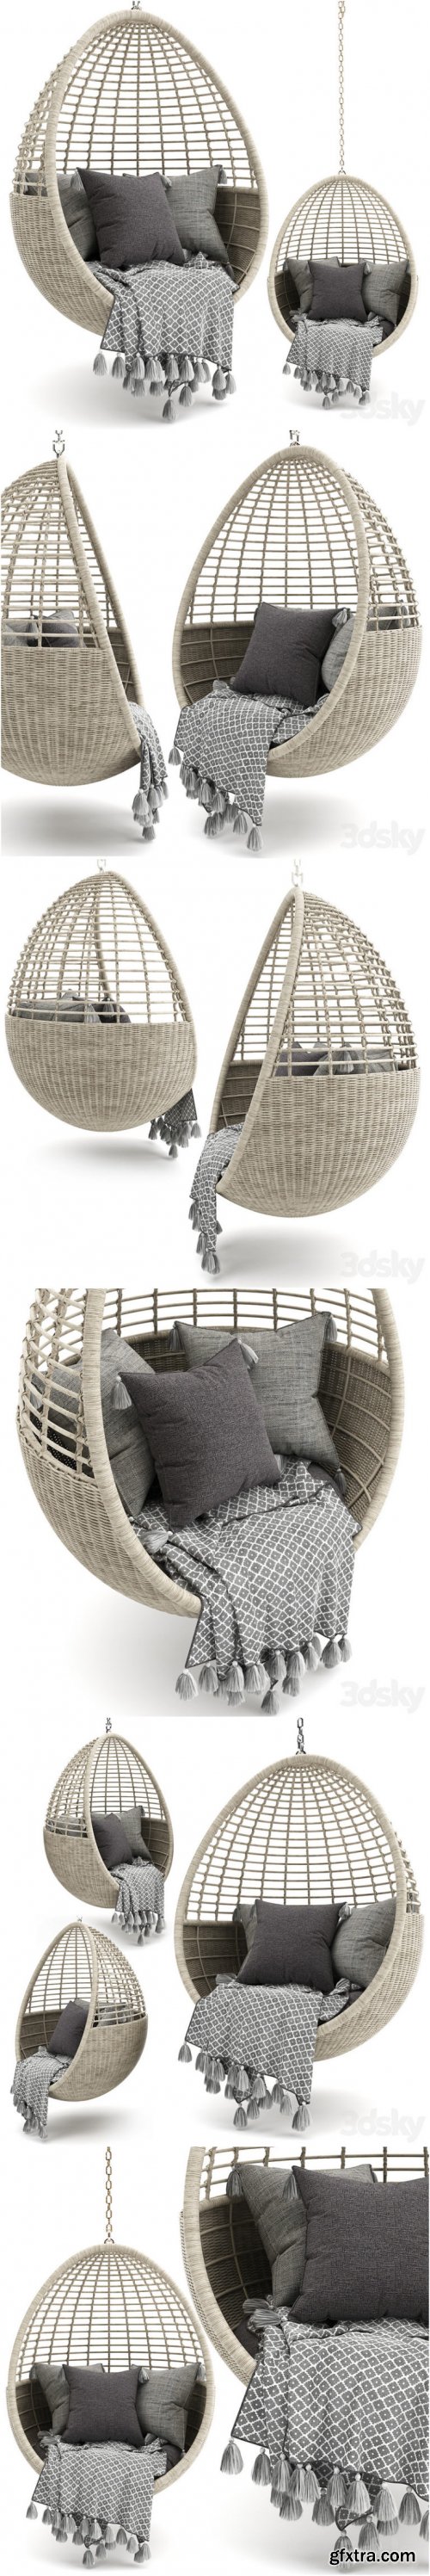 POD HANGING OUTDOO CHAIR 